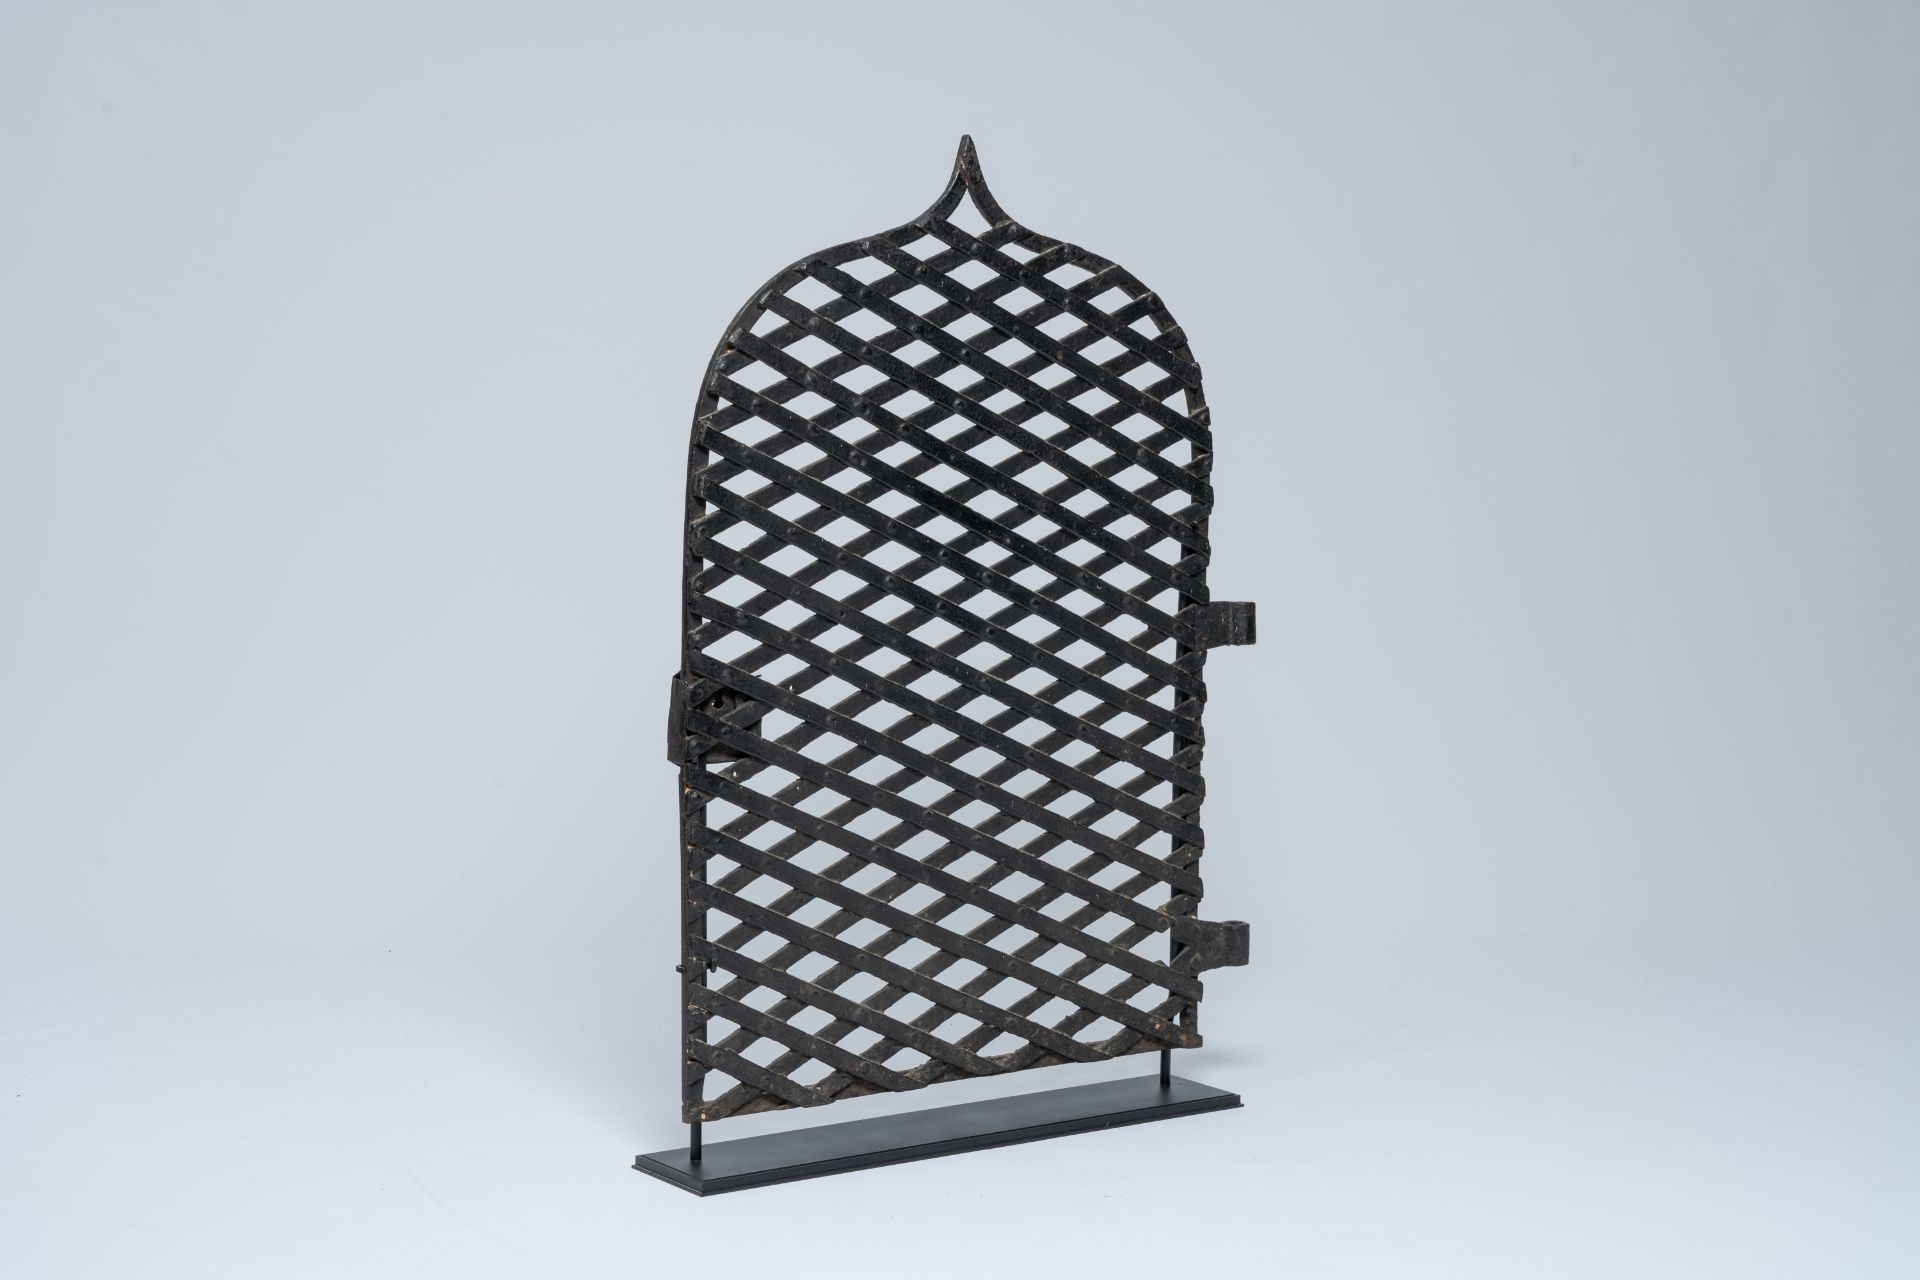 A Flemish or French Gothic wrought iron railing, first quarter 16th C.